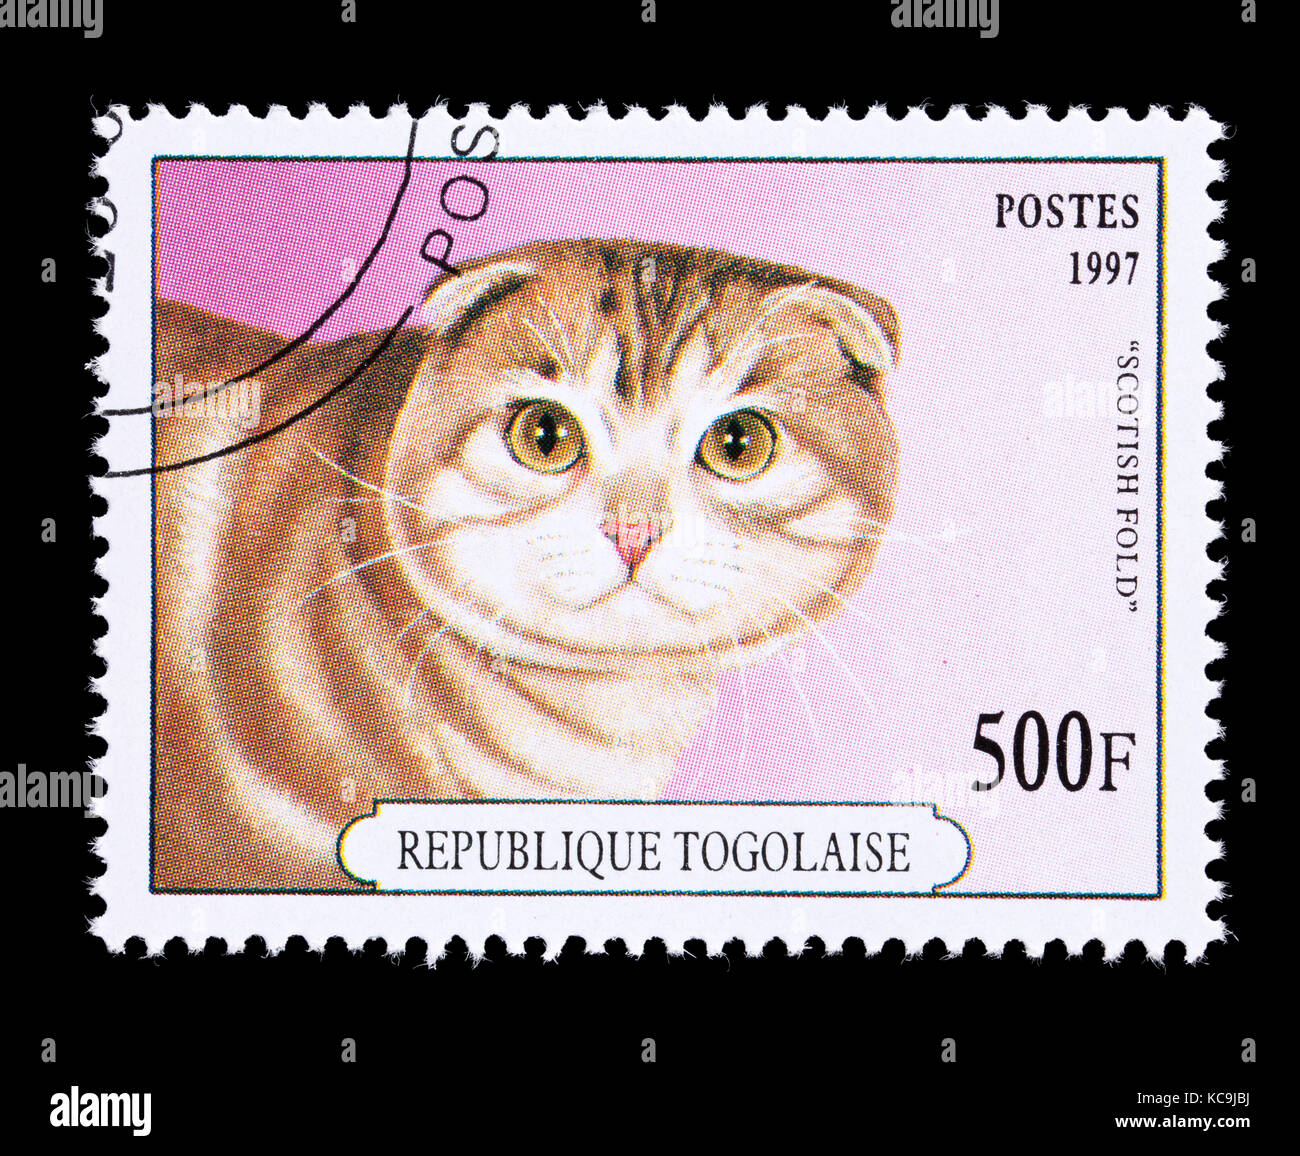 Postage stamp from Togo depicting a Scottish fold breed of housecat. Stock Photo